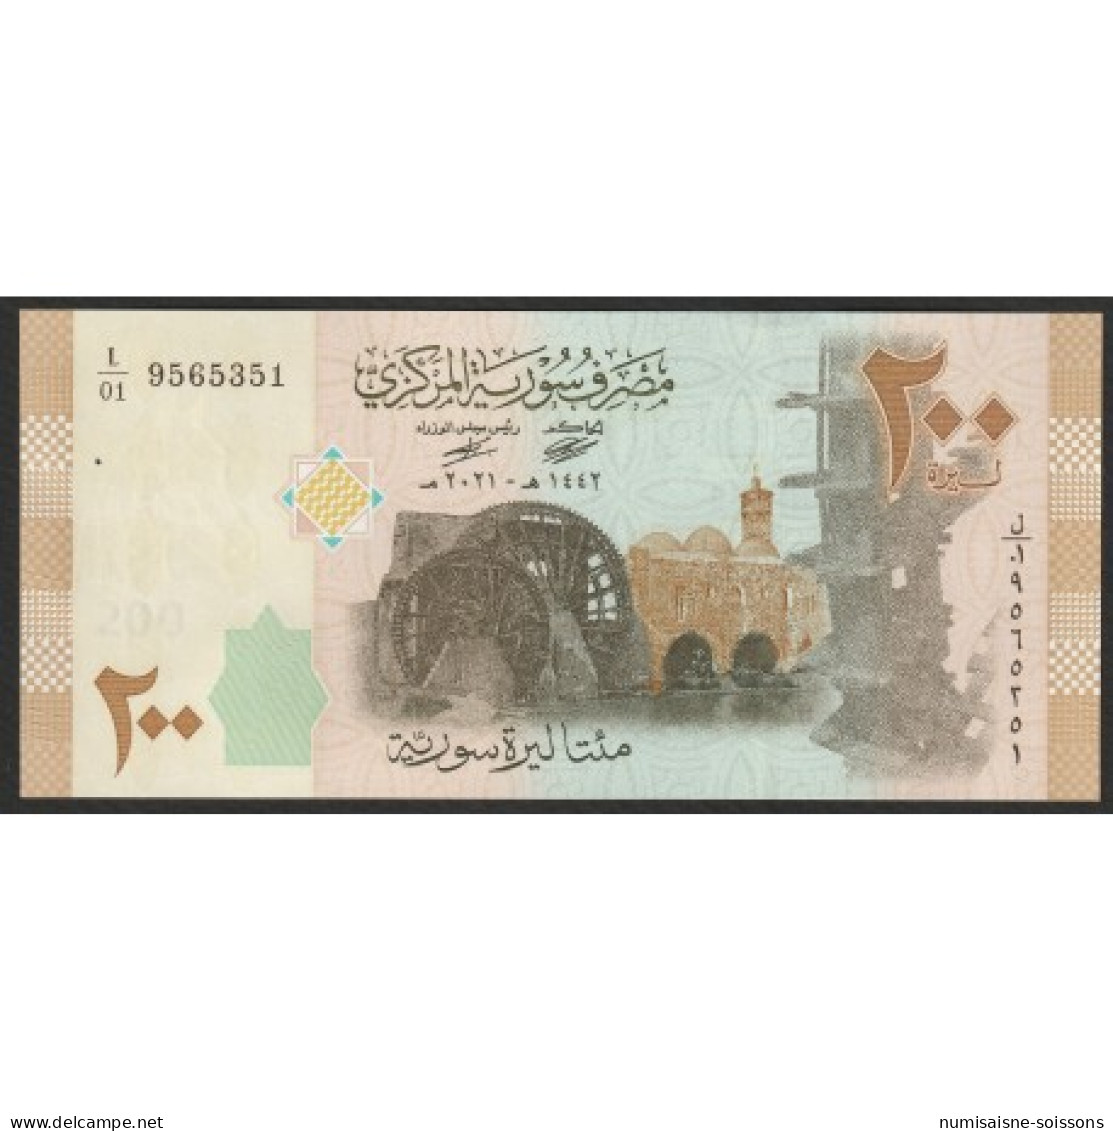 SYRIE - PICK 114 C - 200 POUNDS - 2021 - Syrie